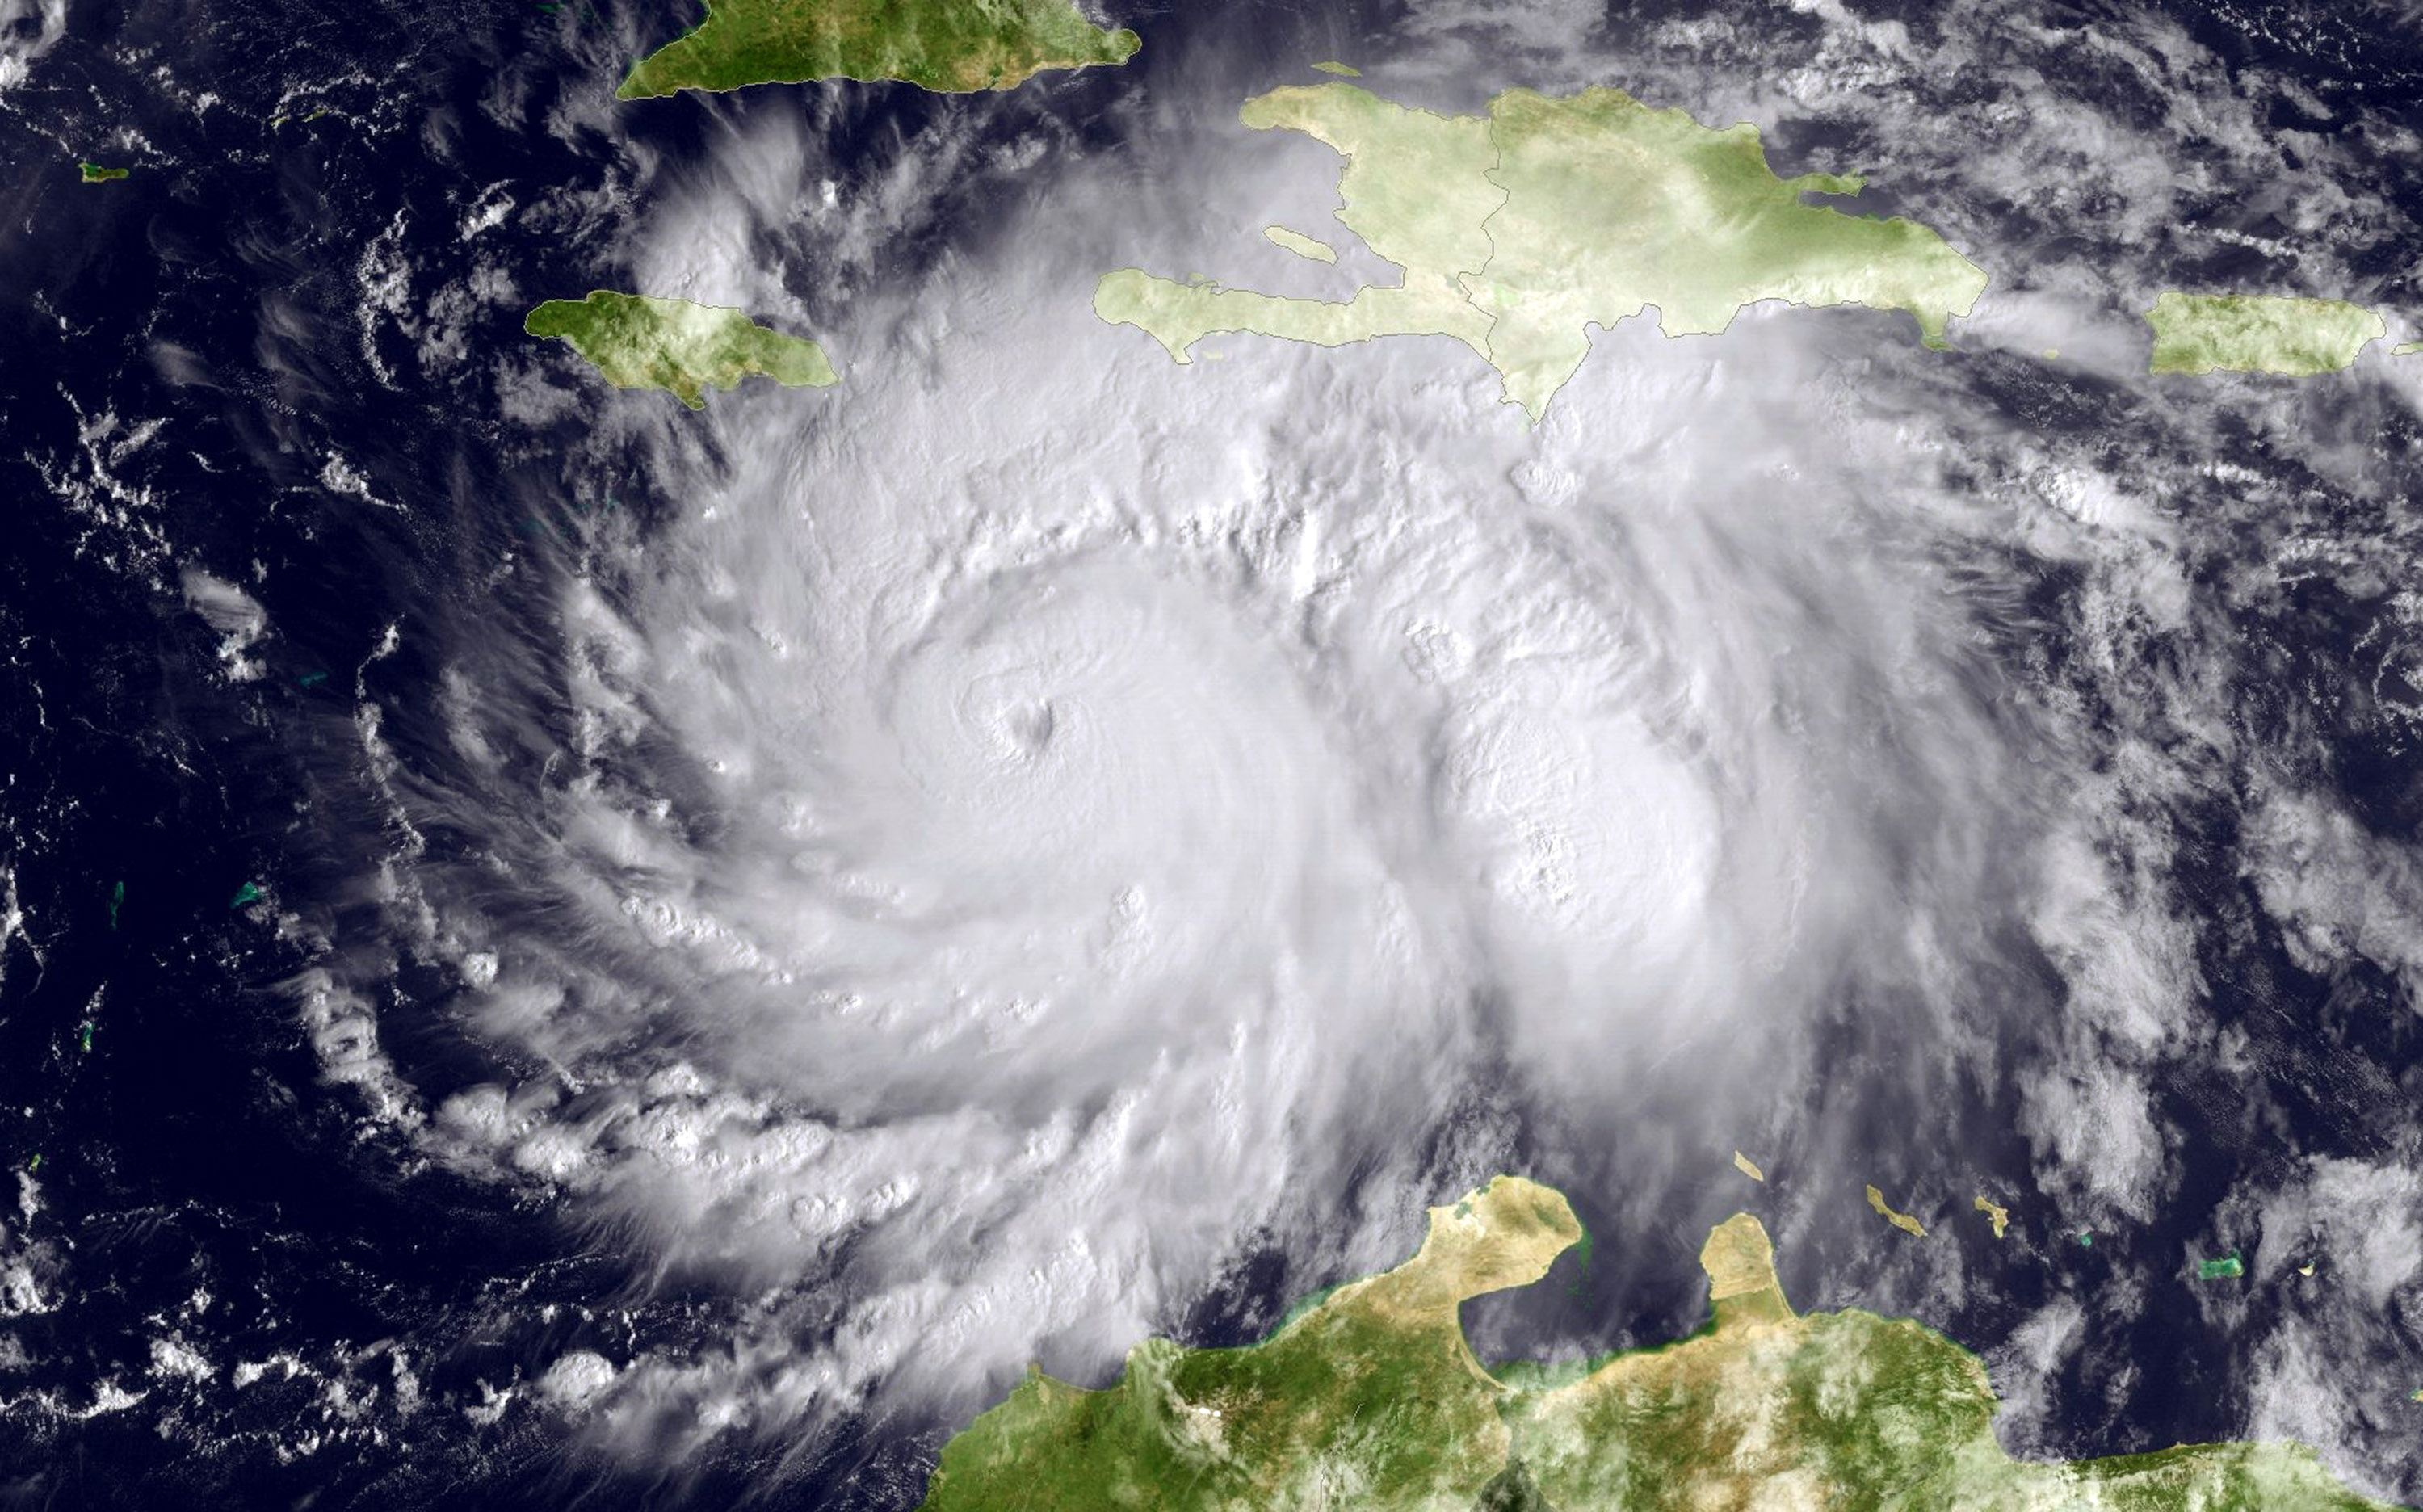 Hurricane Matthew became a Category 5 hurricane, making it the strongest hurricane to form in the Caribbean Sea